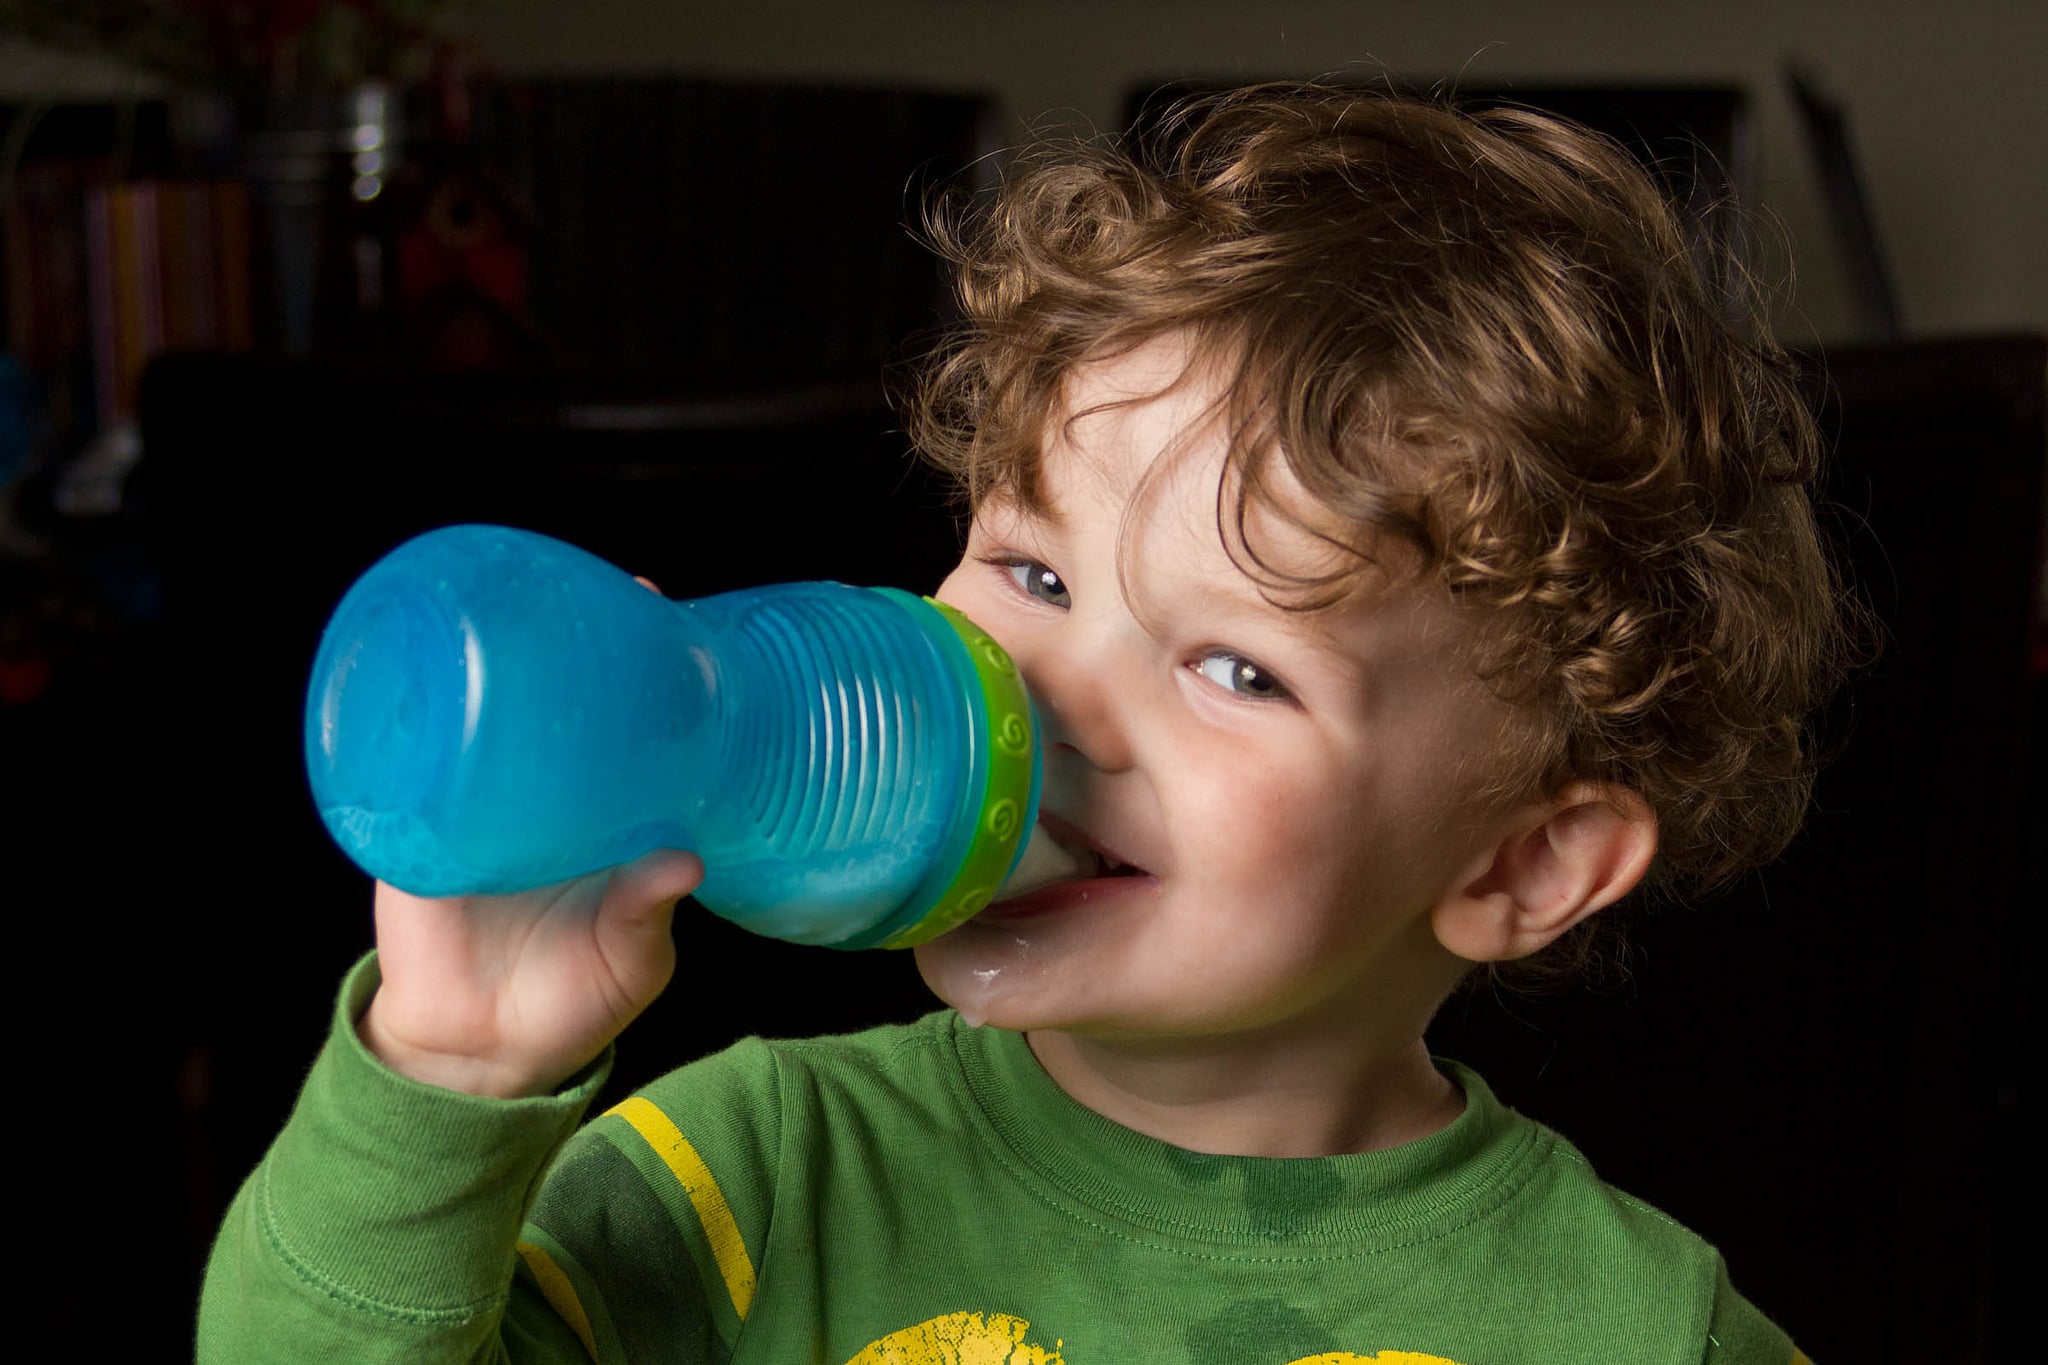 5 best sippy cups to help your toddler transition to a cup